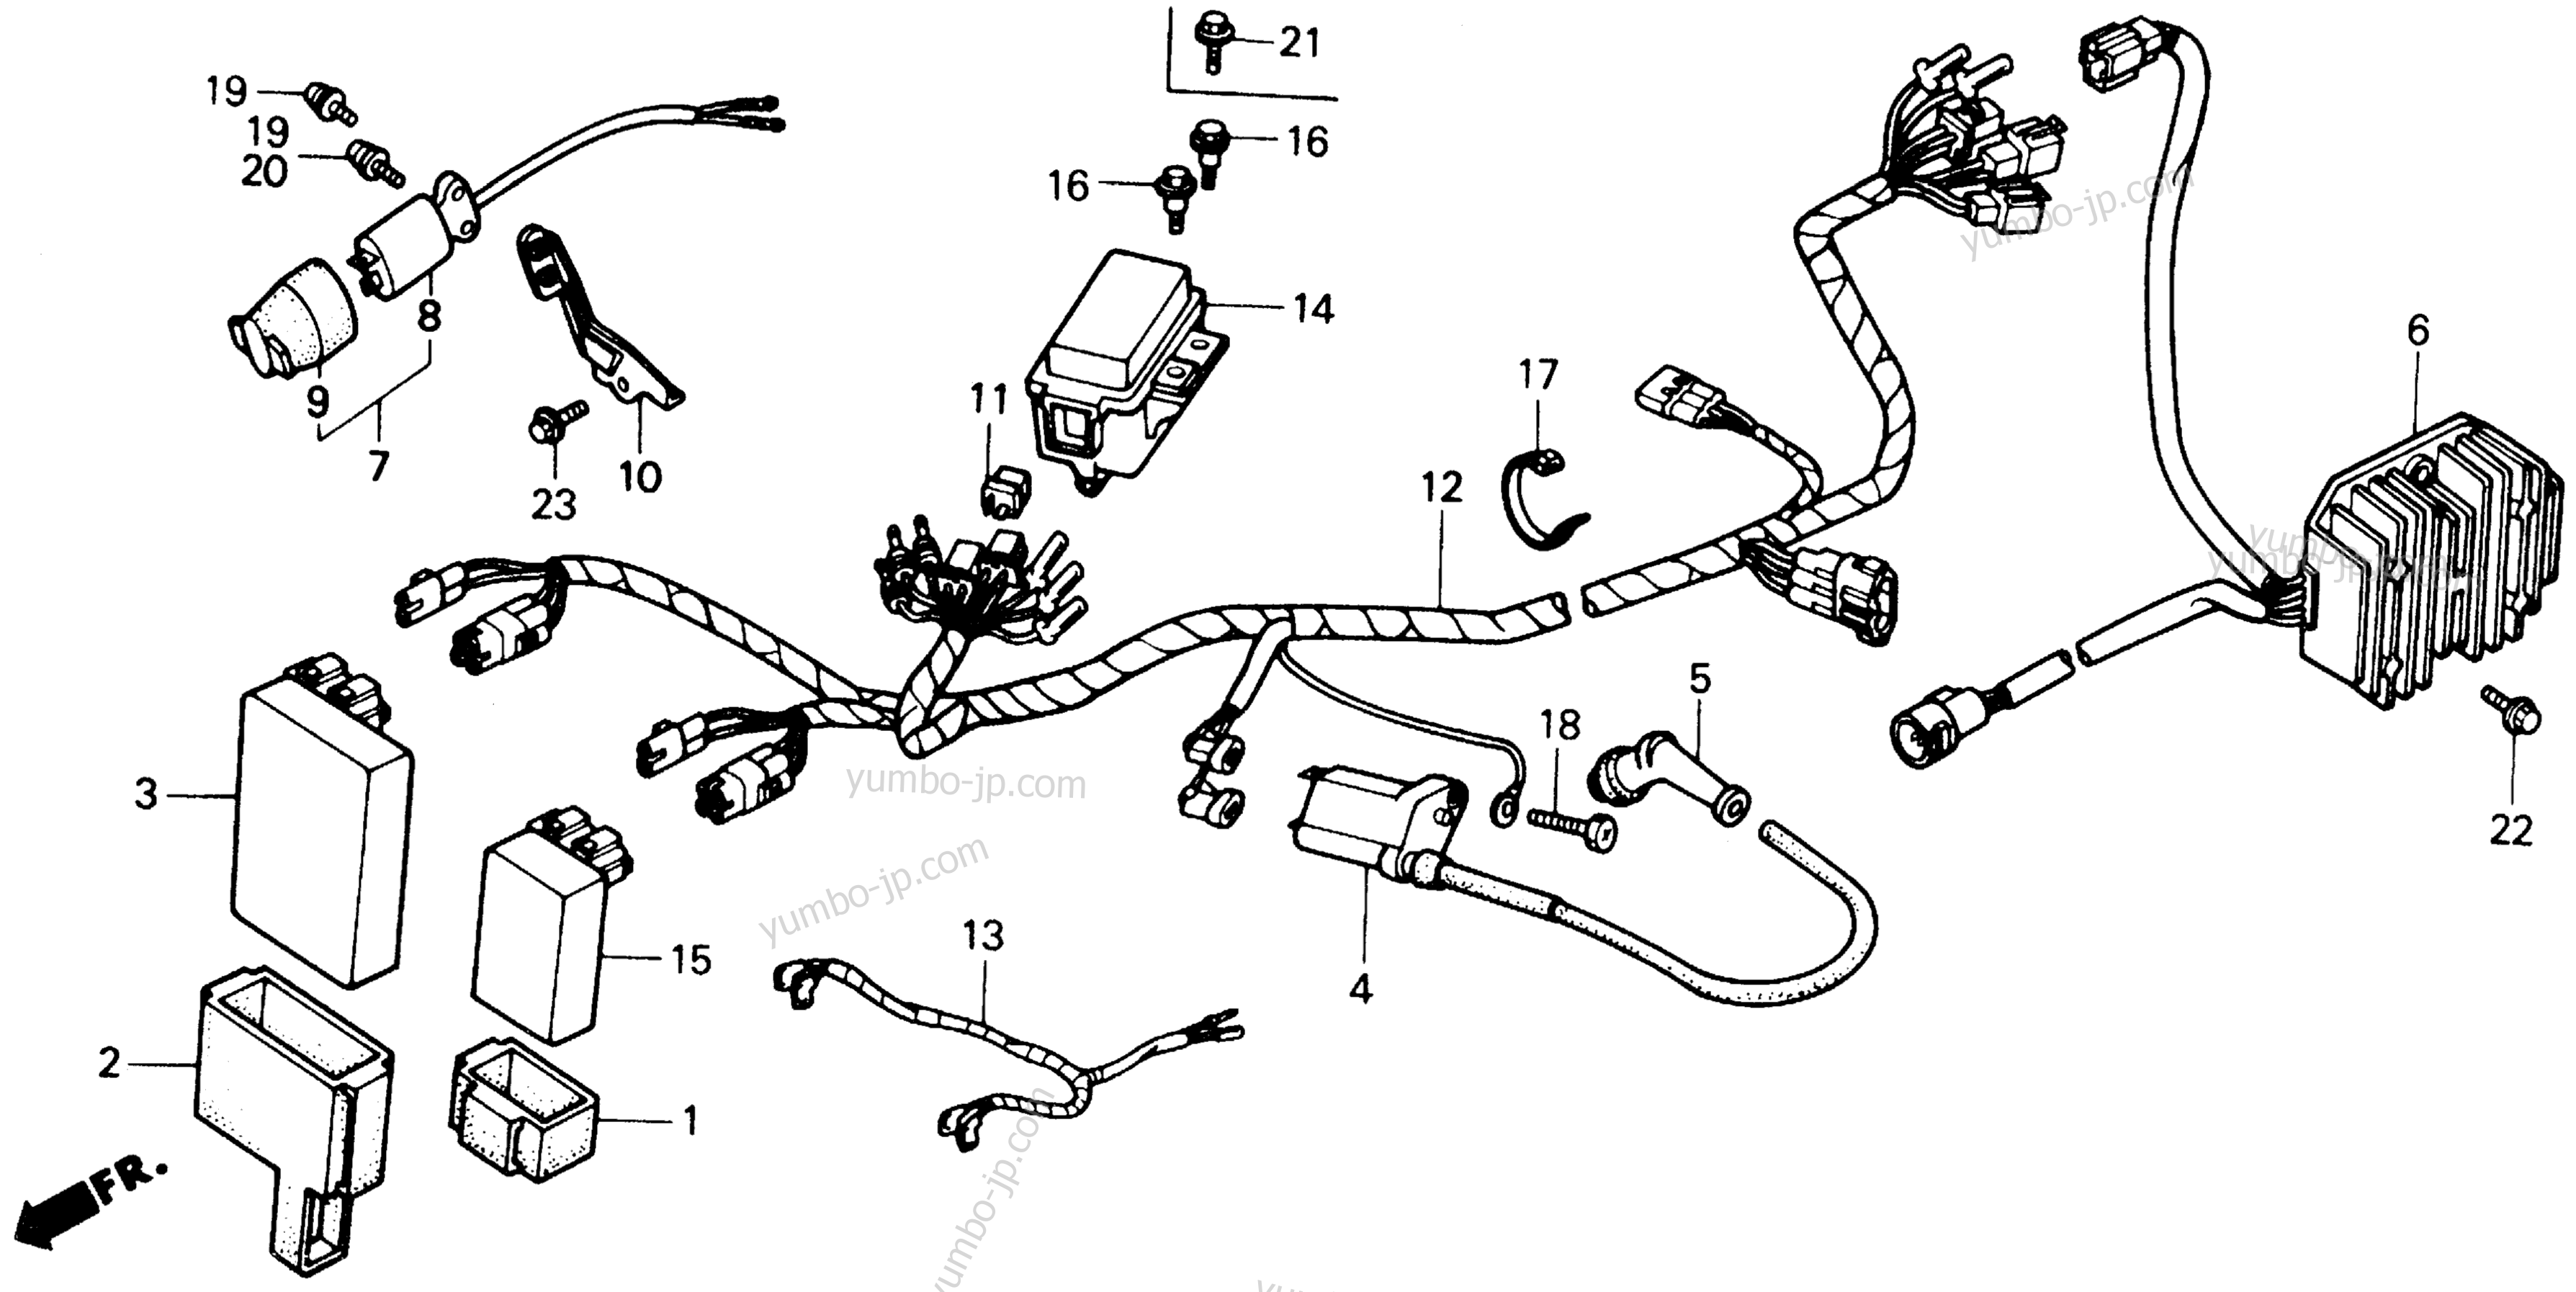 WIRE HARNESS for ATVs HONDA TRX300FW AN 1991 year